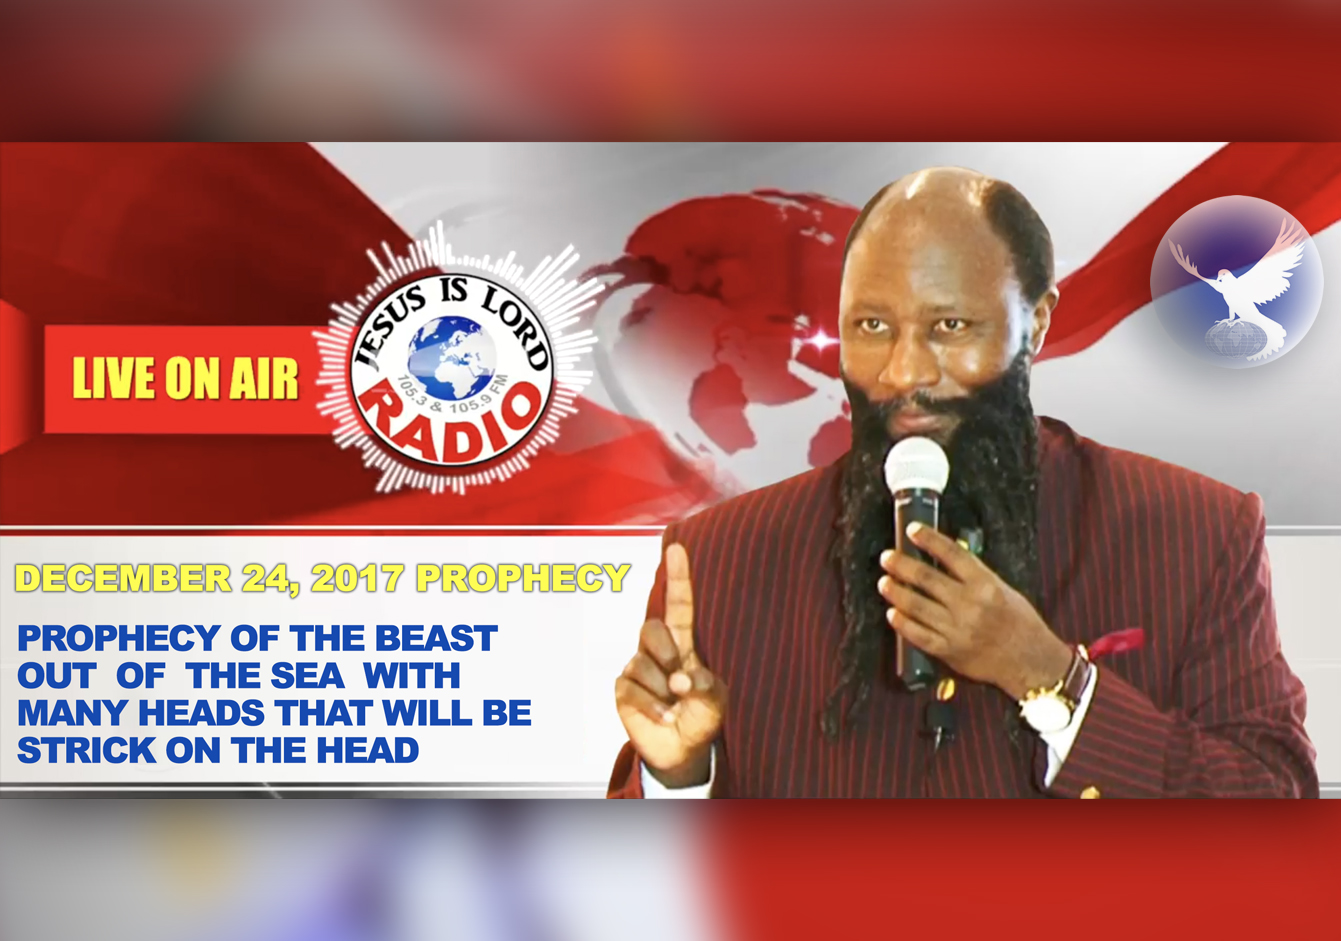 EPISODE 78 - PROPHECY OF THE BEAST OUT OF THE SEAS WITH MANY HEADS THAT WILL BE STRUCK ON THE HEAD (24DEC2017) - PROPHET DR. OWUOR